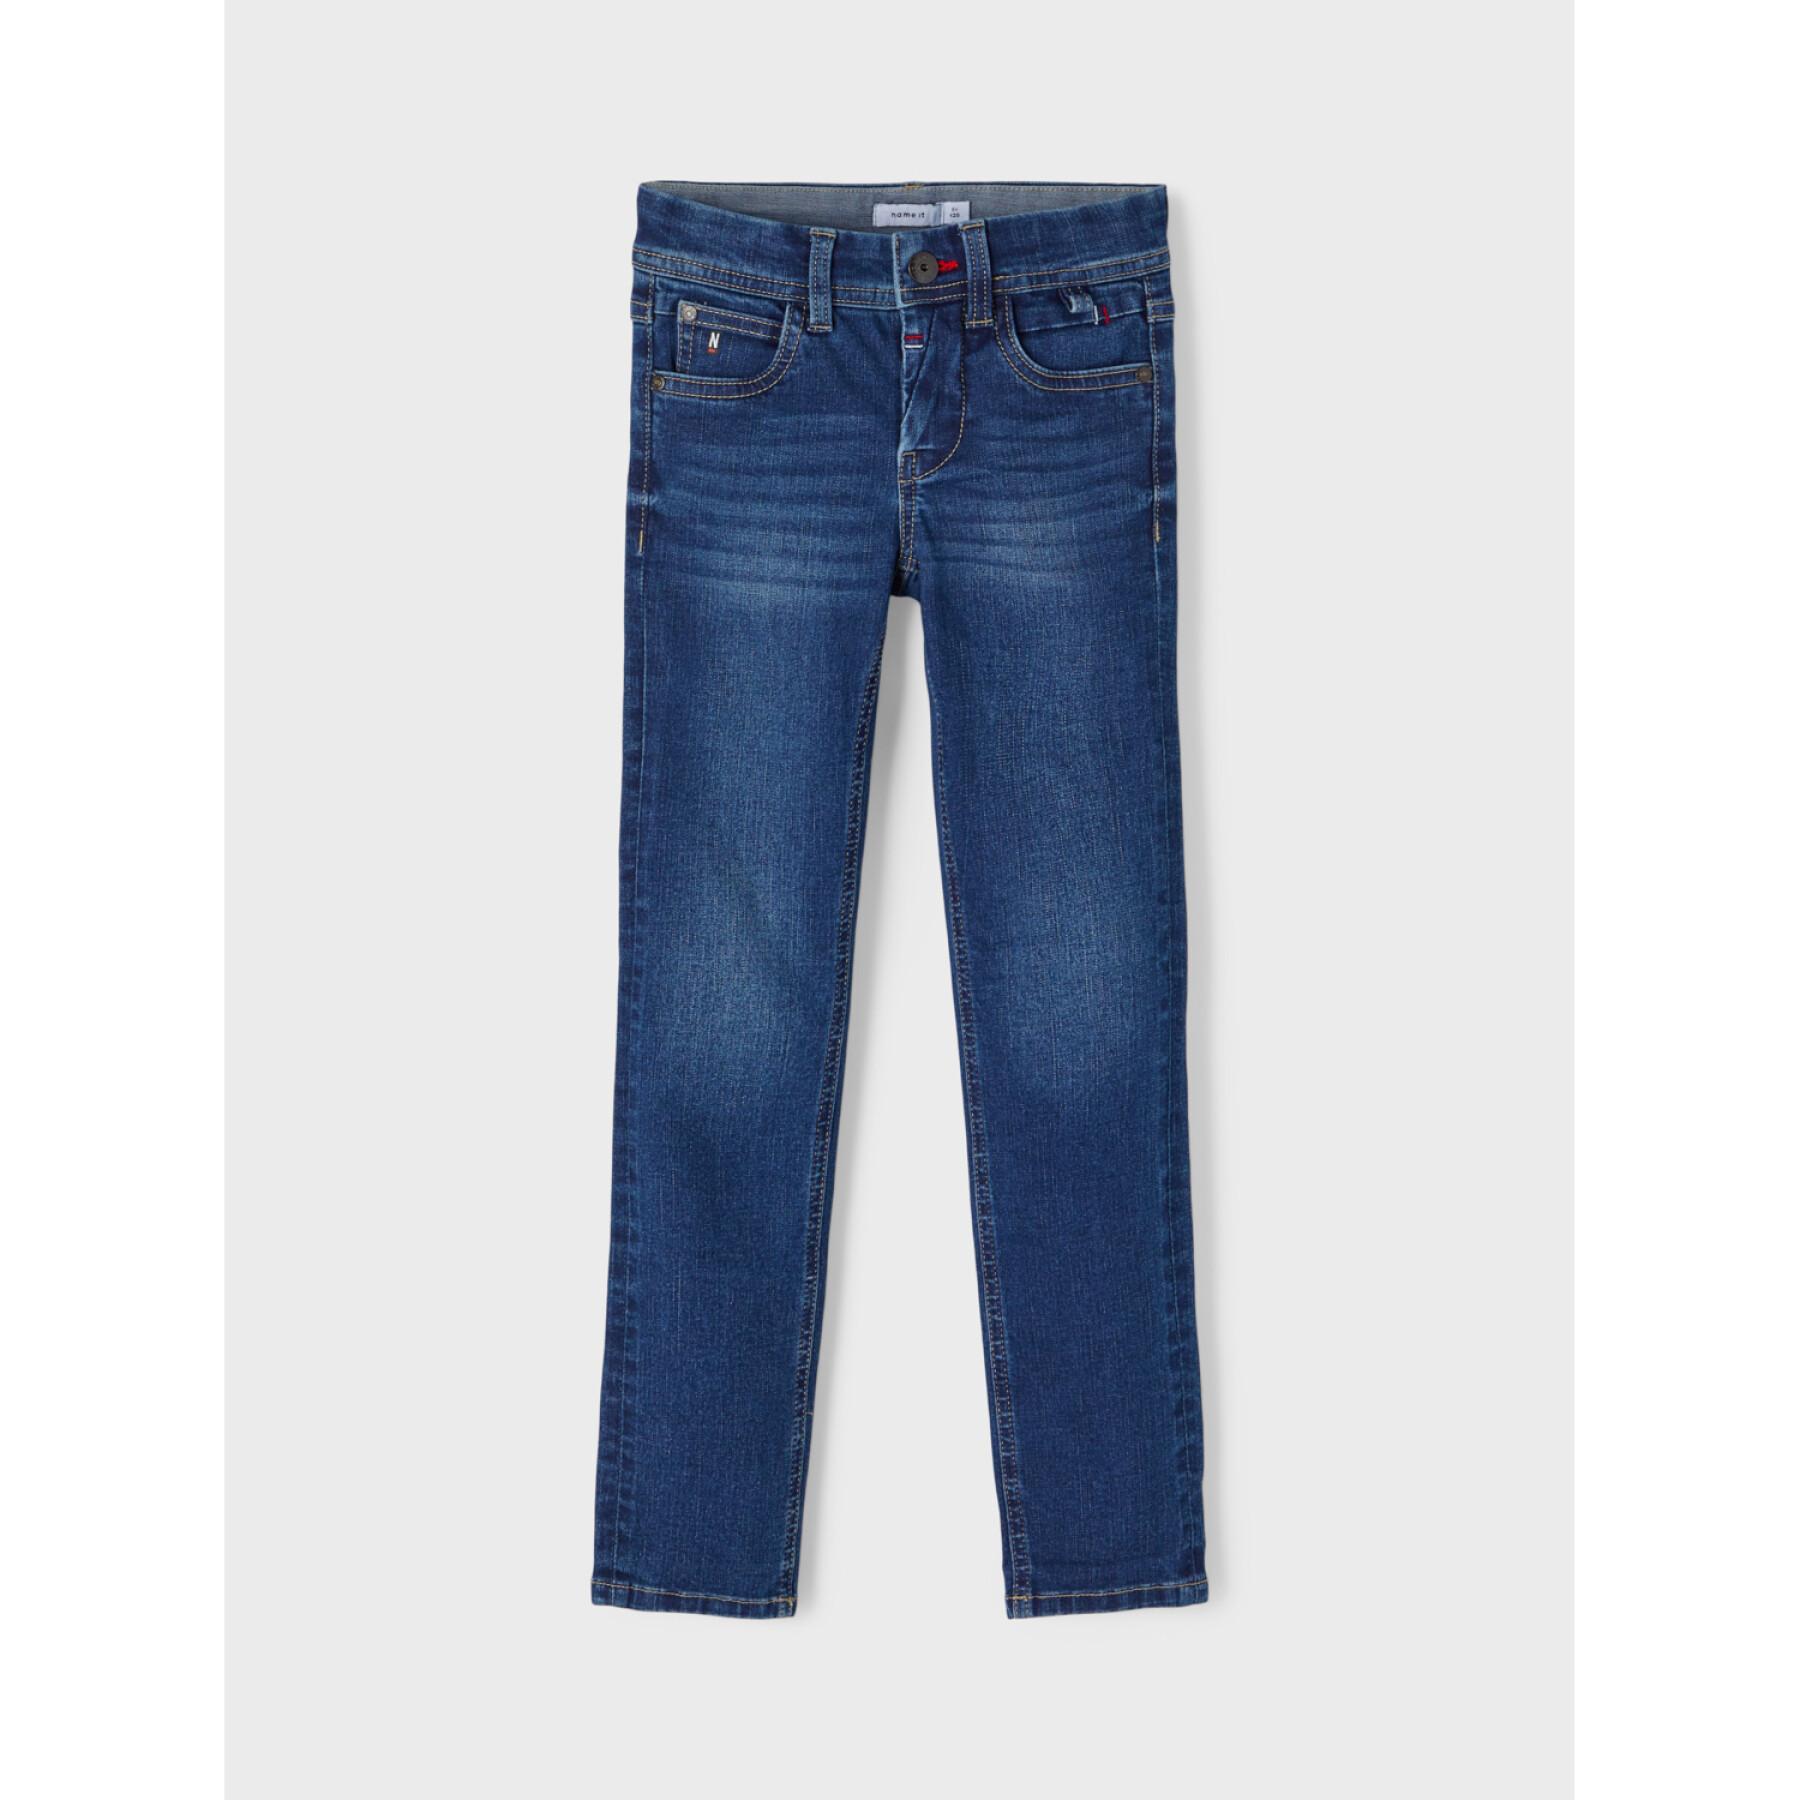 Kinderjeans Name it Theo Taul 3618